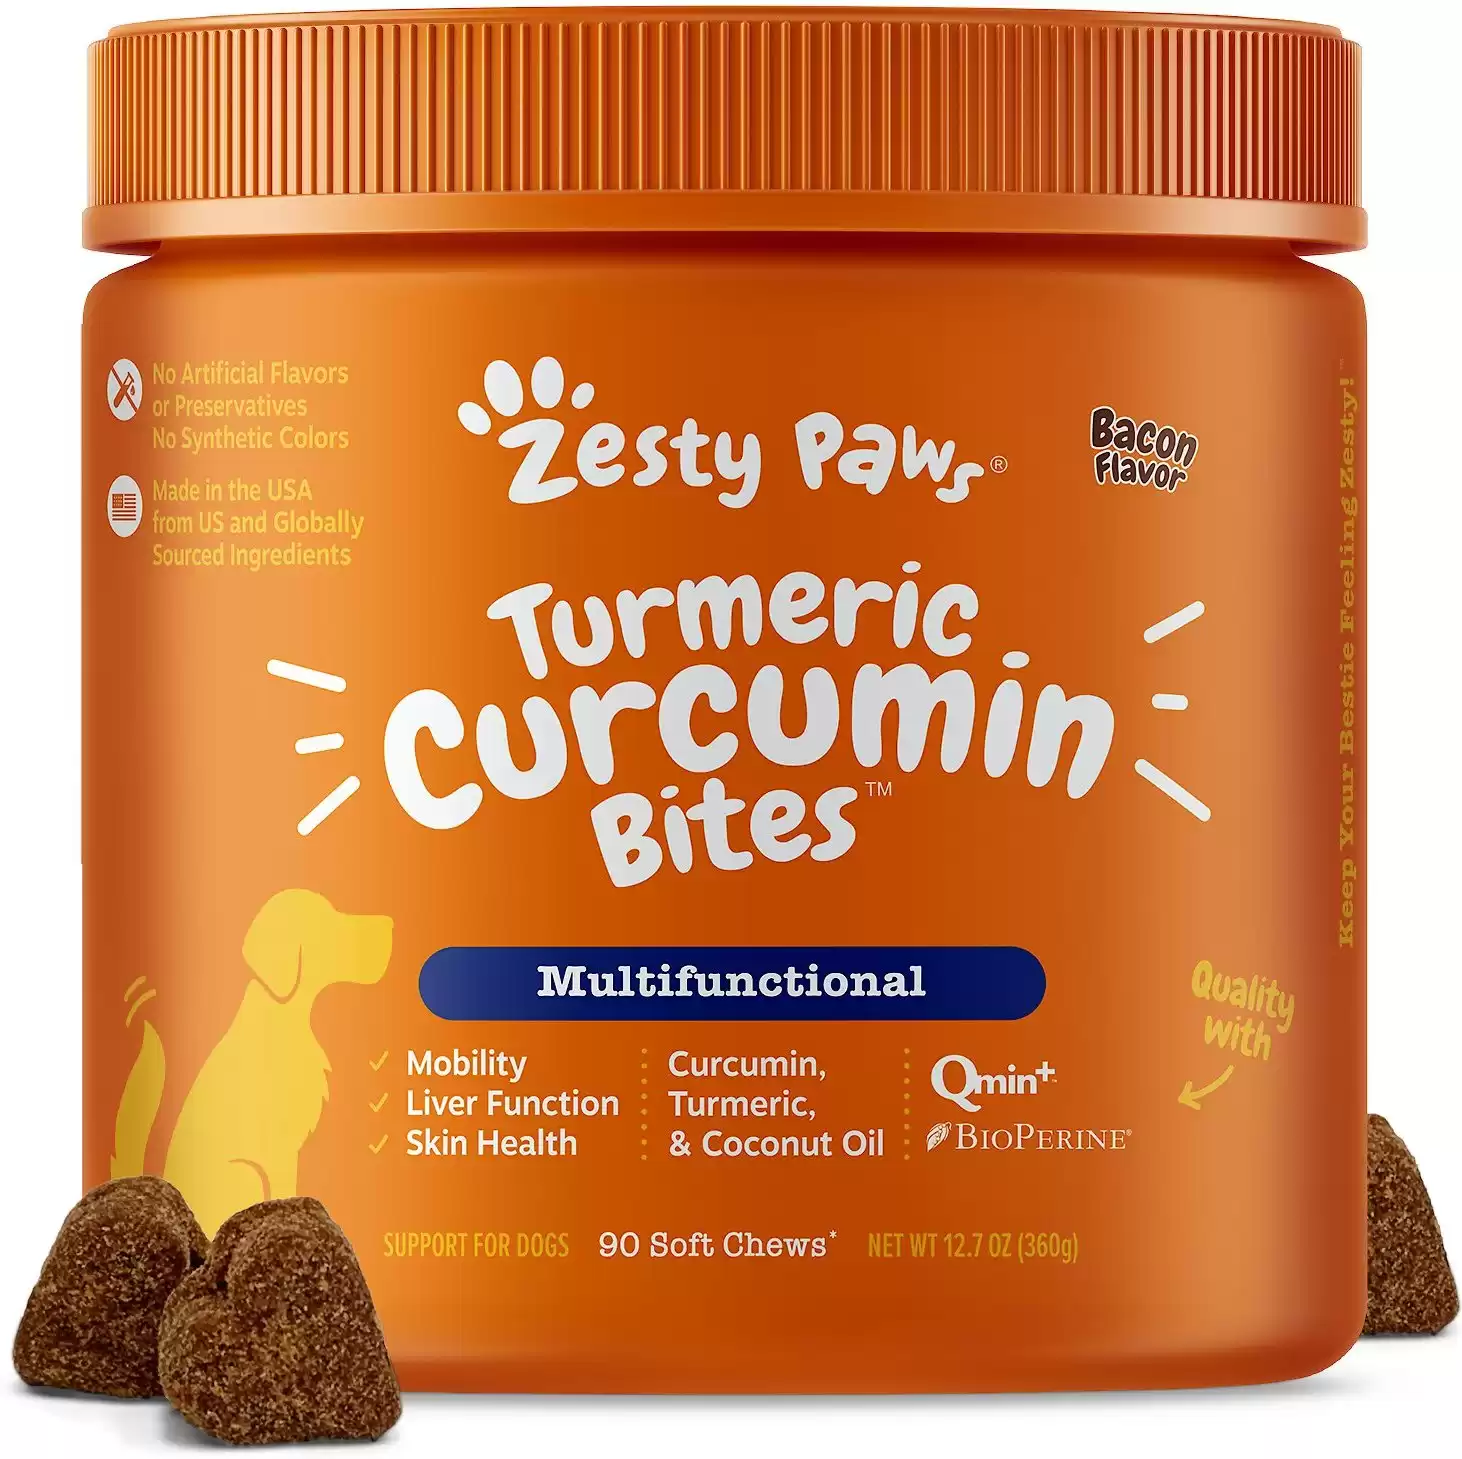 Zesty Paws Turmeric Curcumin Bites Bacon Flavored Soft Chews Multivitamin for Dogs